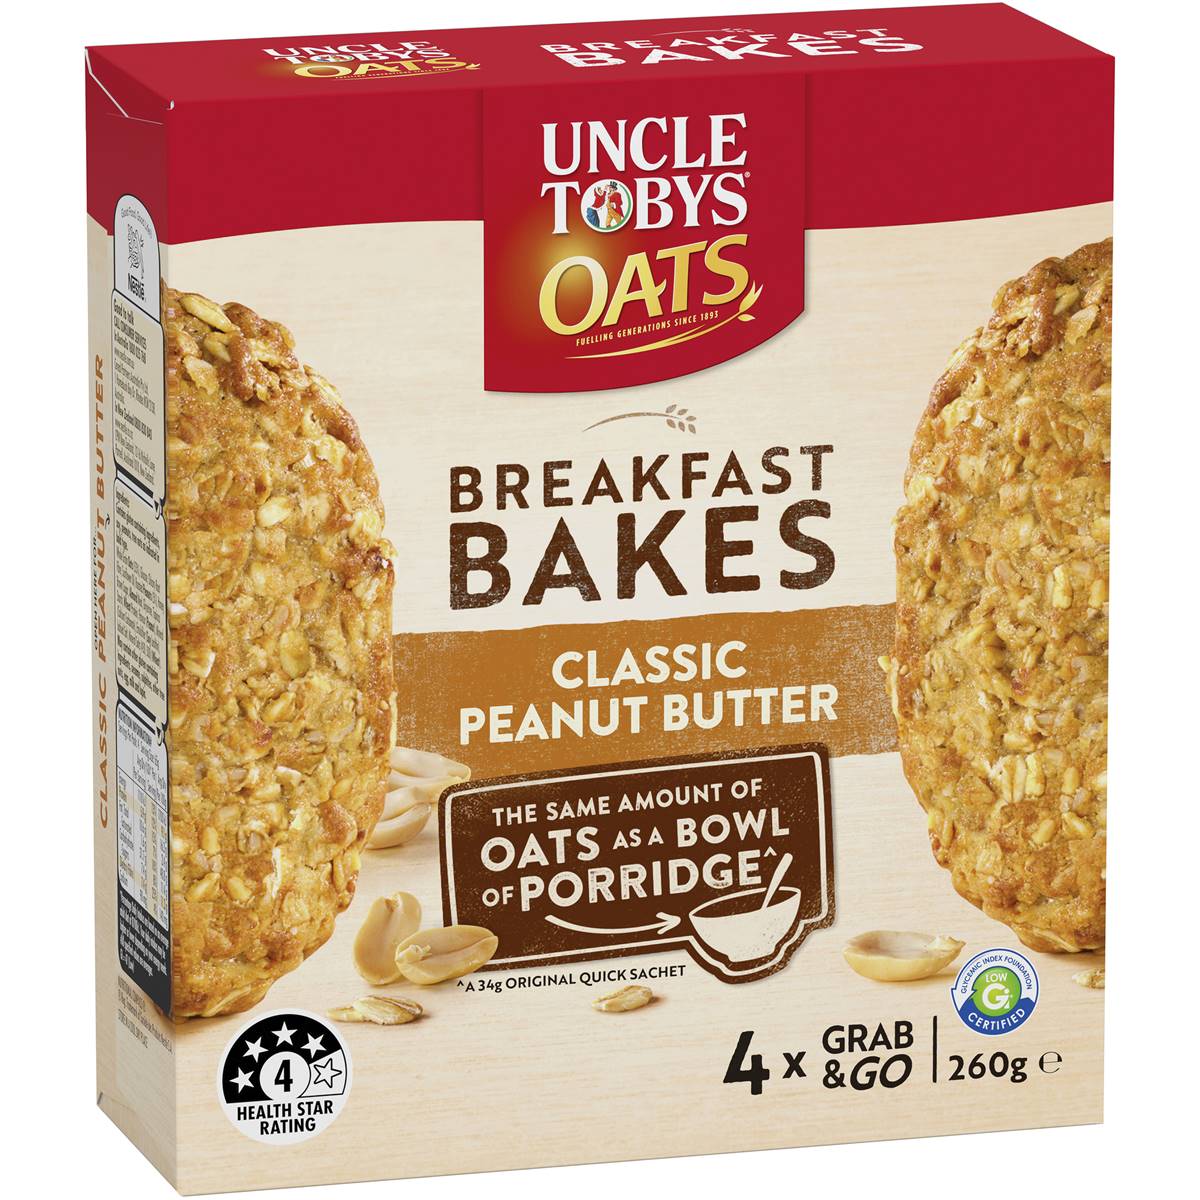 Calories in Uncle Tobys Oats Breakfast Bakes Cereal Bar Classic Peanut Butter